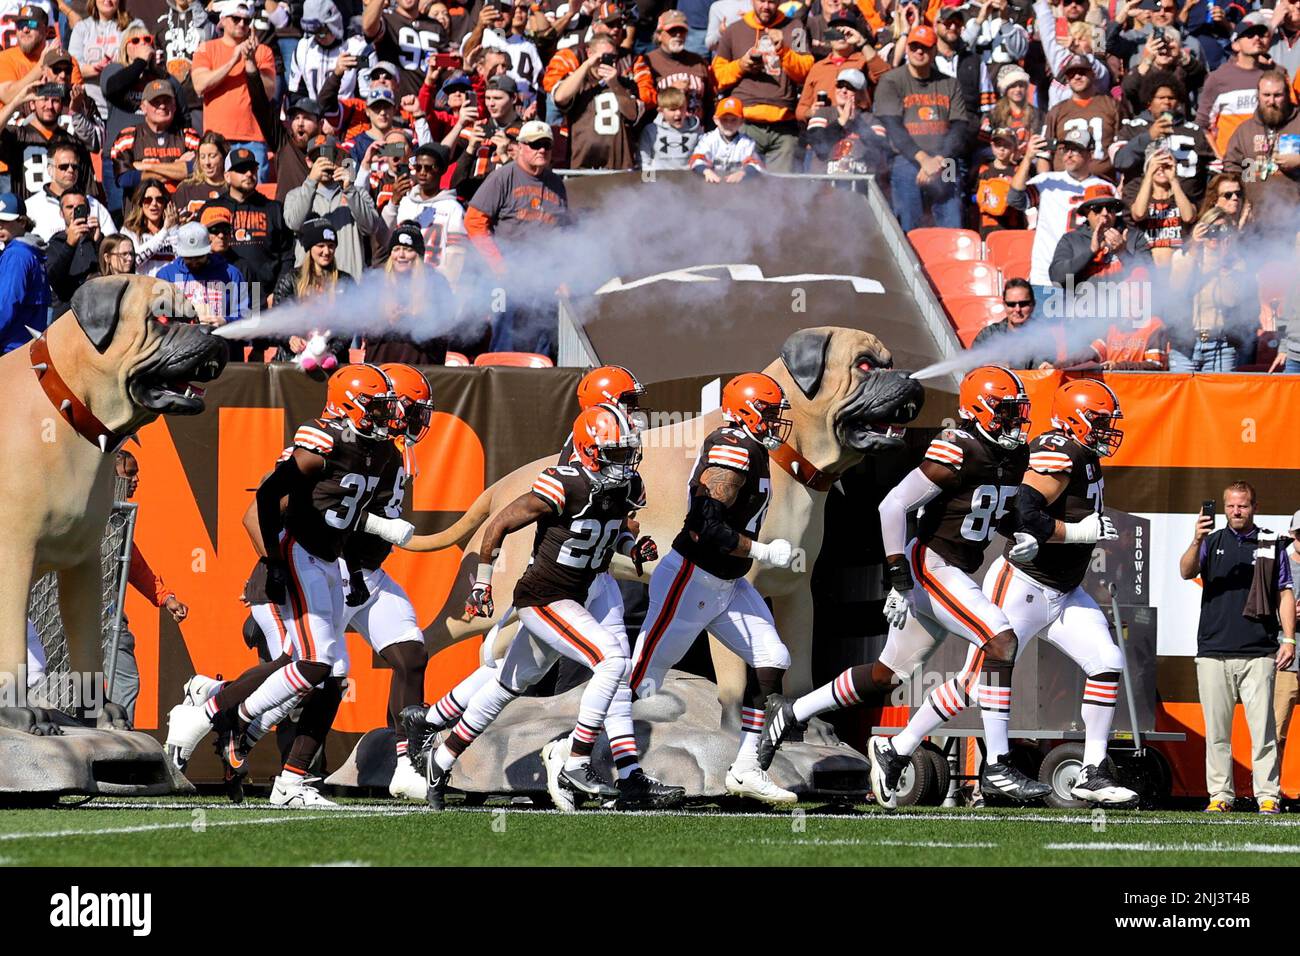 CLEVELAND, OH - OCTOBER 16: The Cleveland Browns take the field